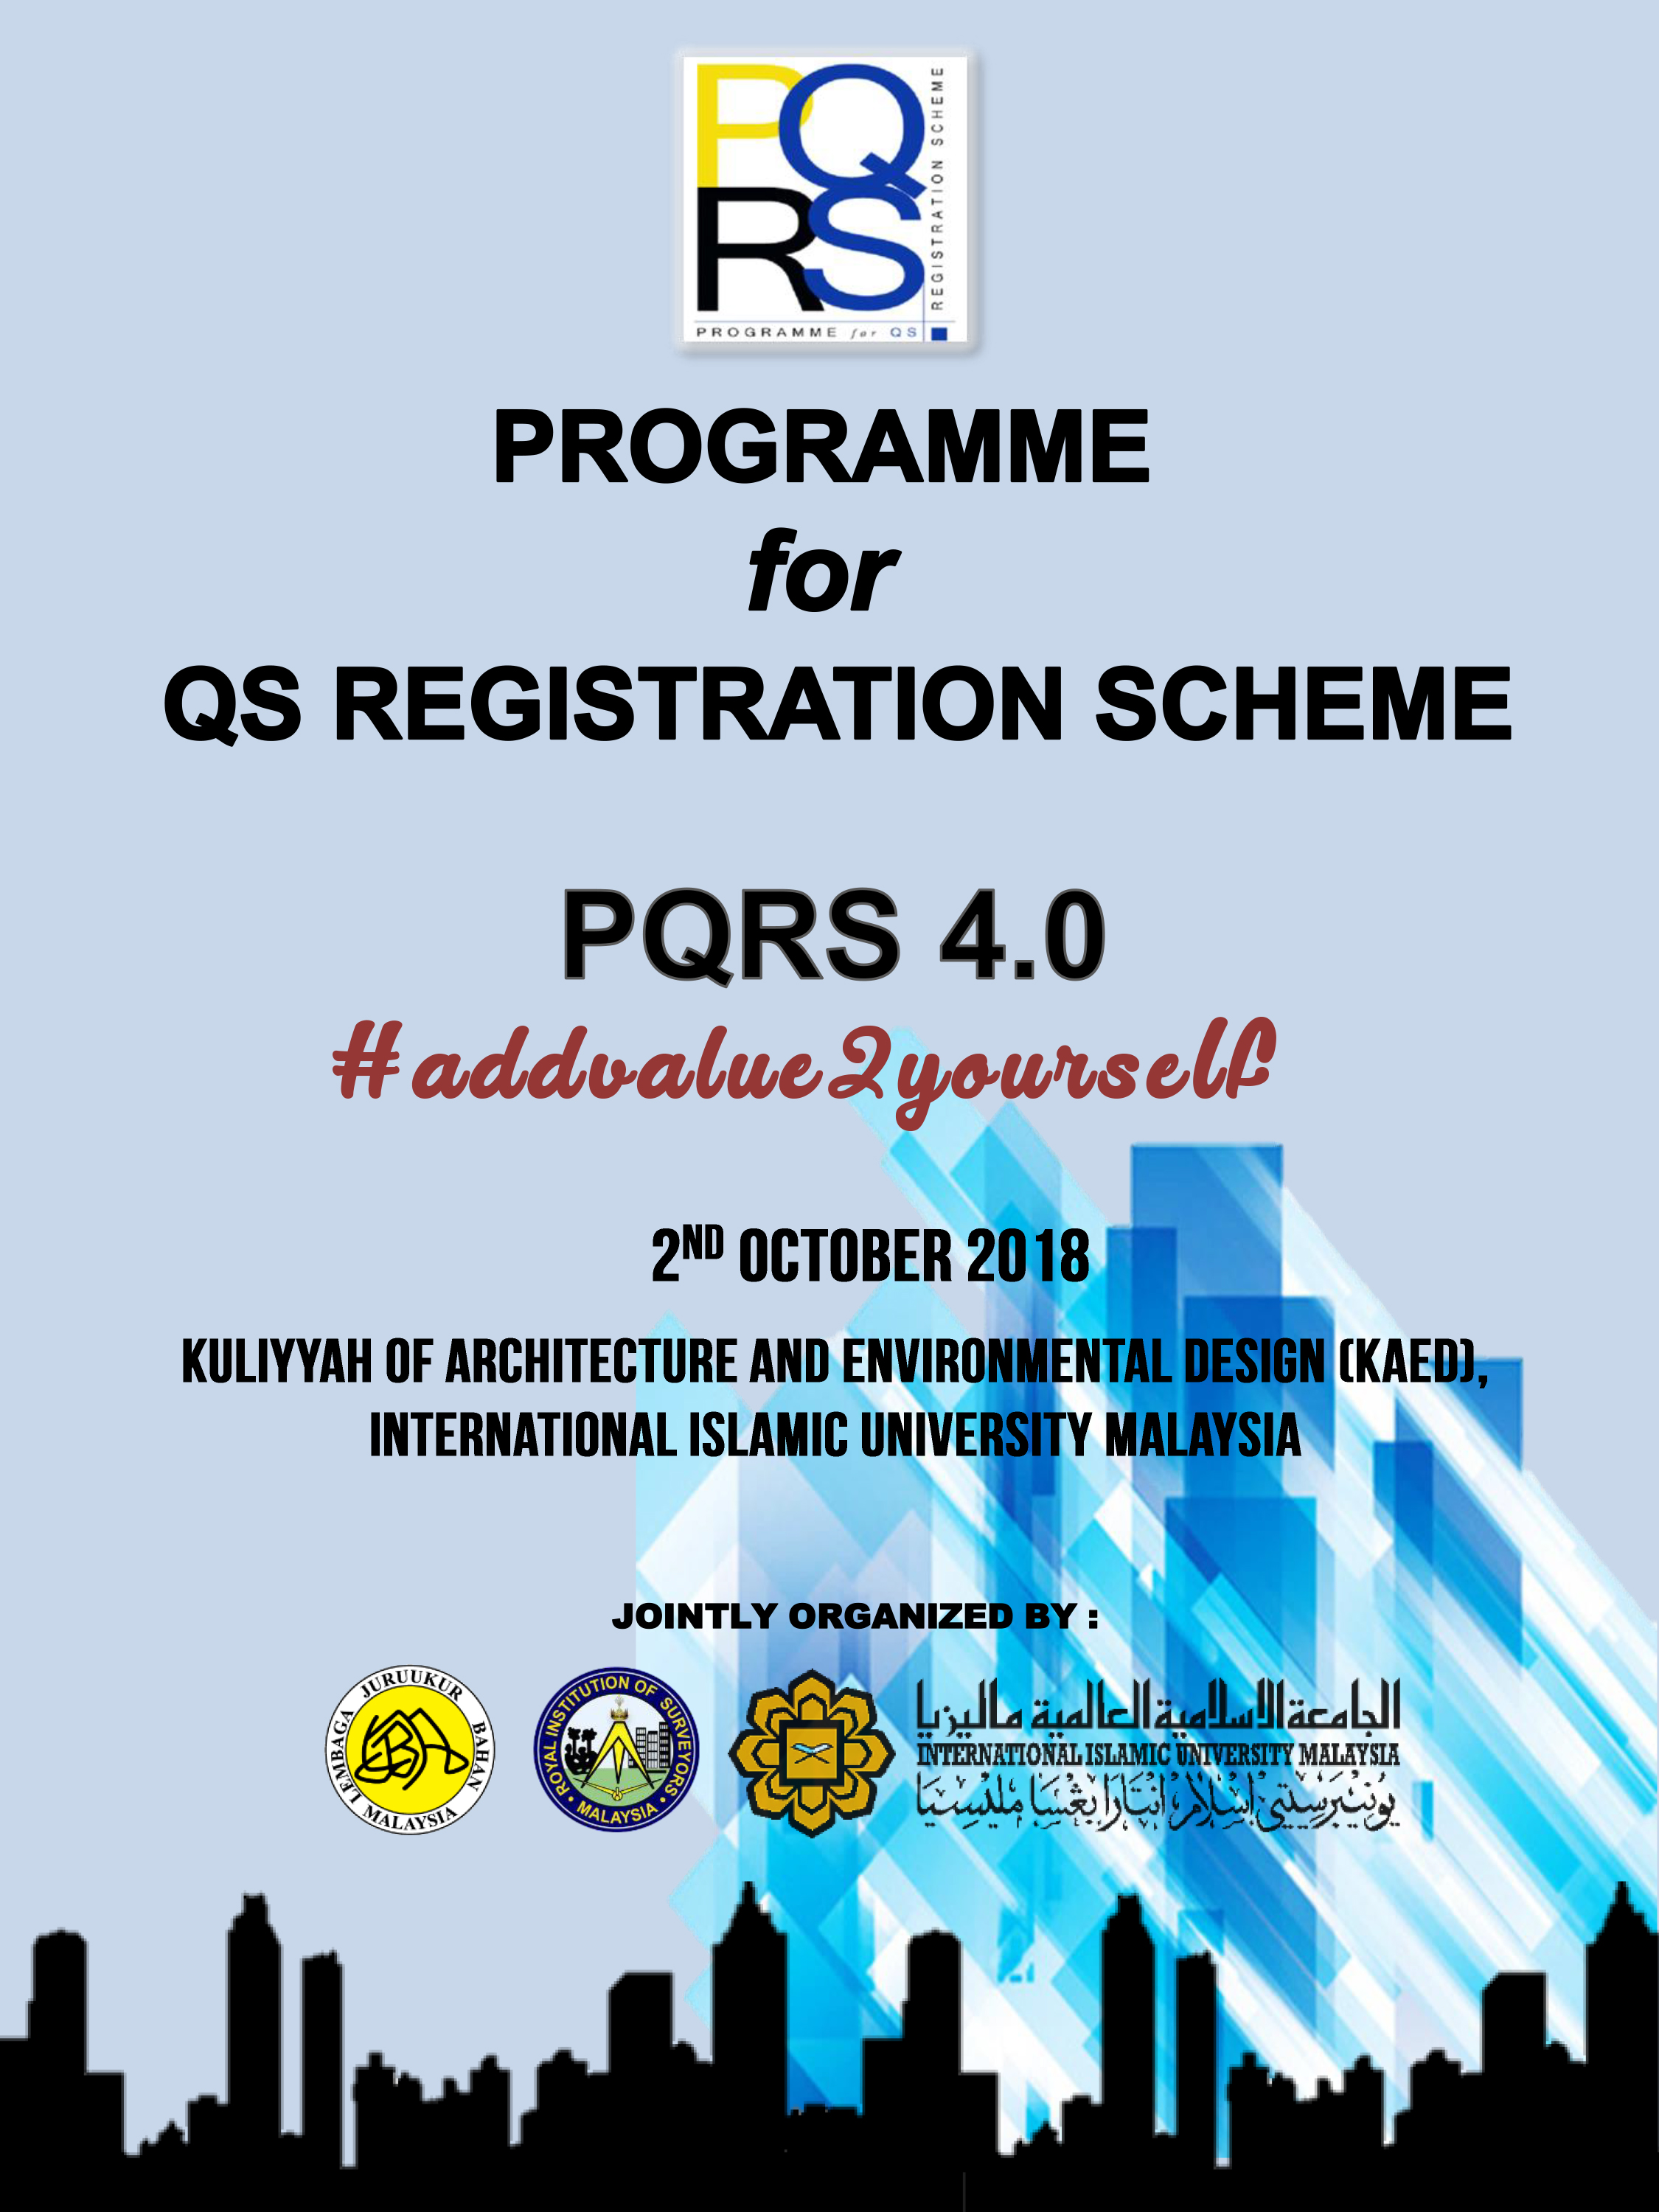 PQRS 4.0 : #addvalue2yourself